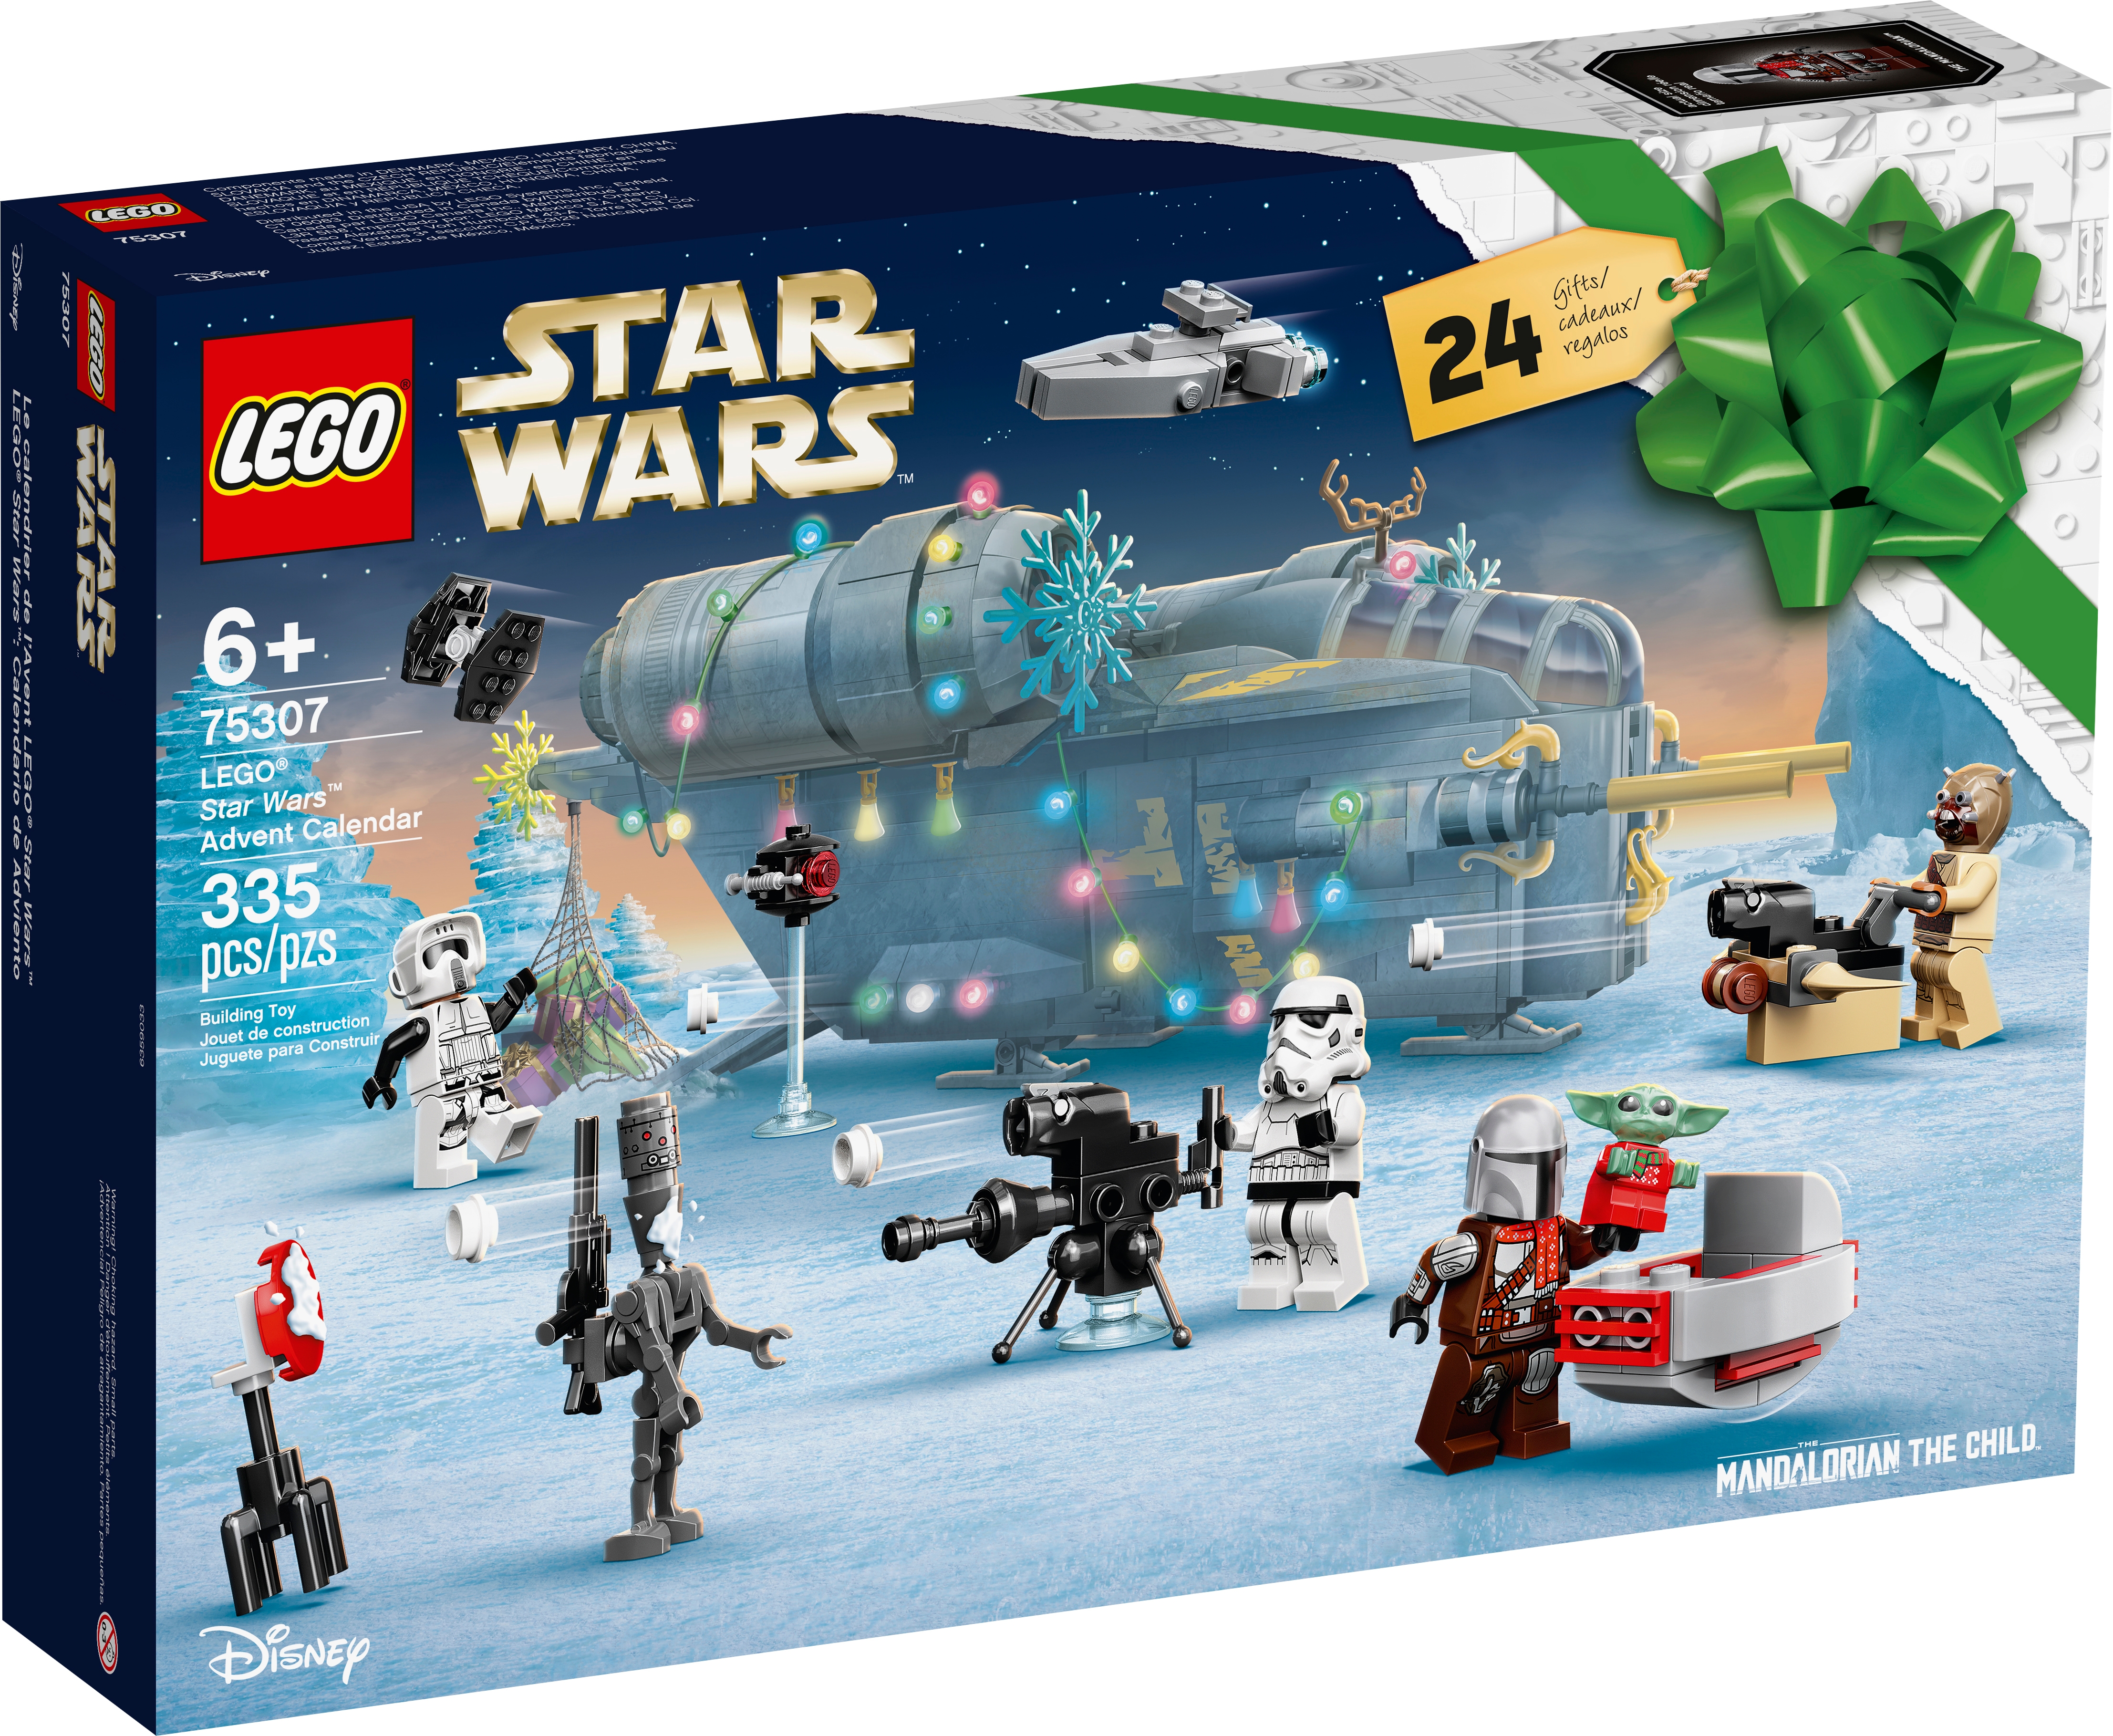 Lego Star Wars Advent Calendar 21 Star Wars Buy Online At The Official Lego Shop Us